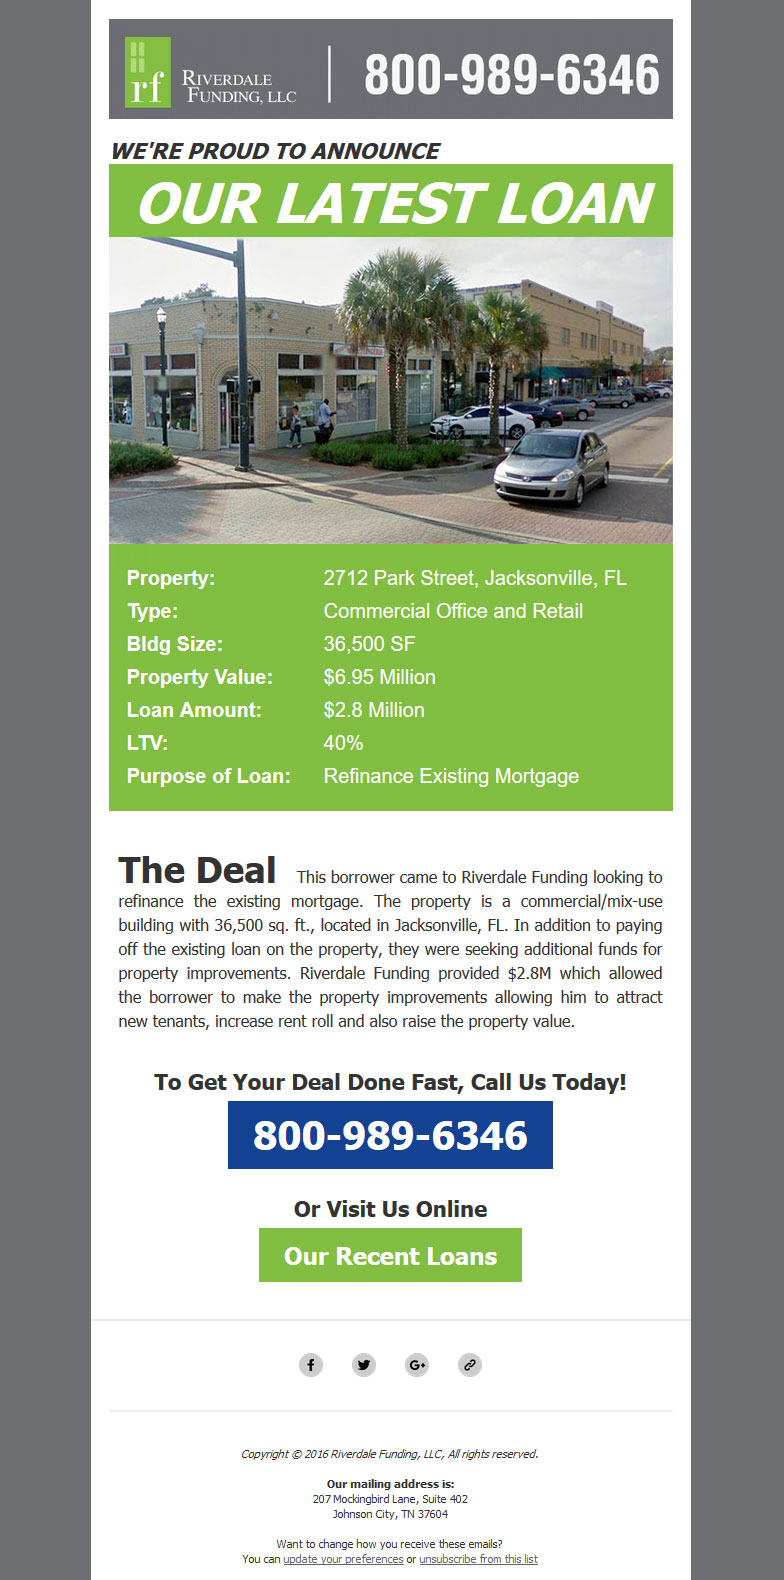 Client-facing email campaign with feature property - Woodbridge Group of Companies